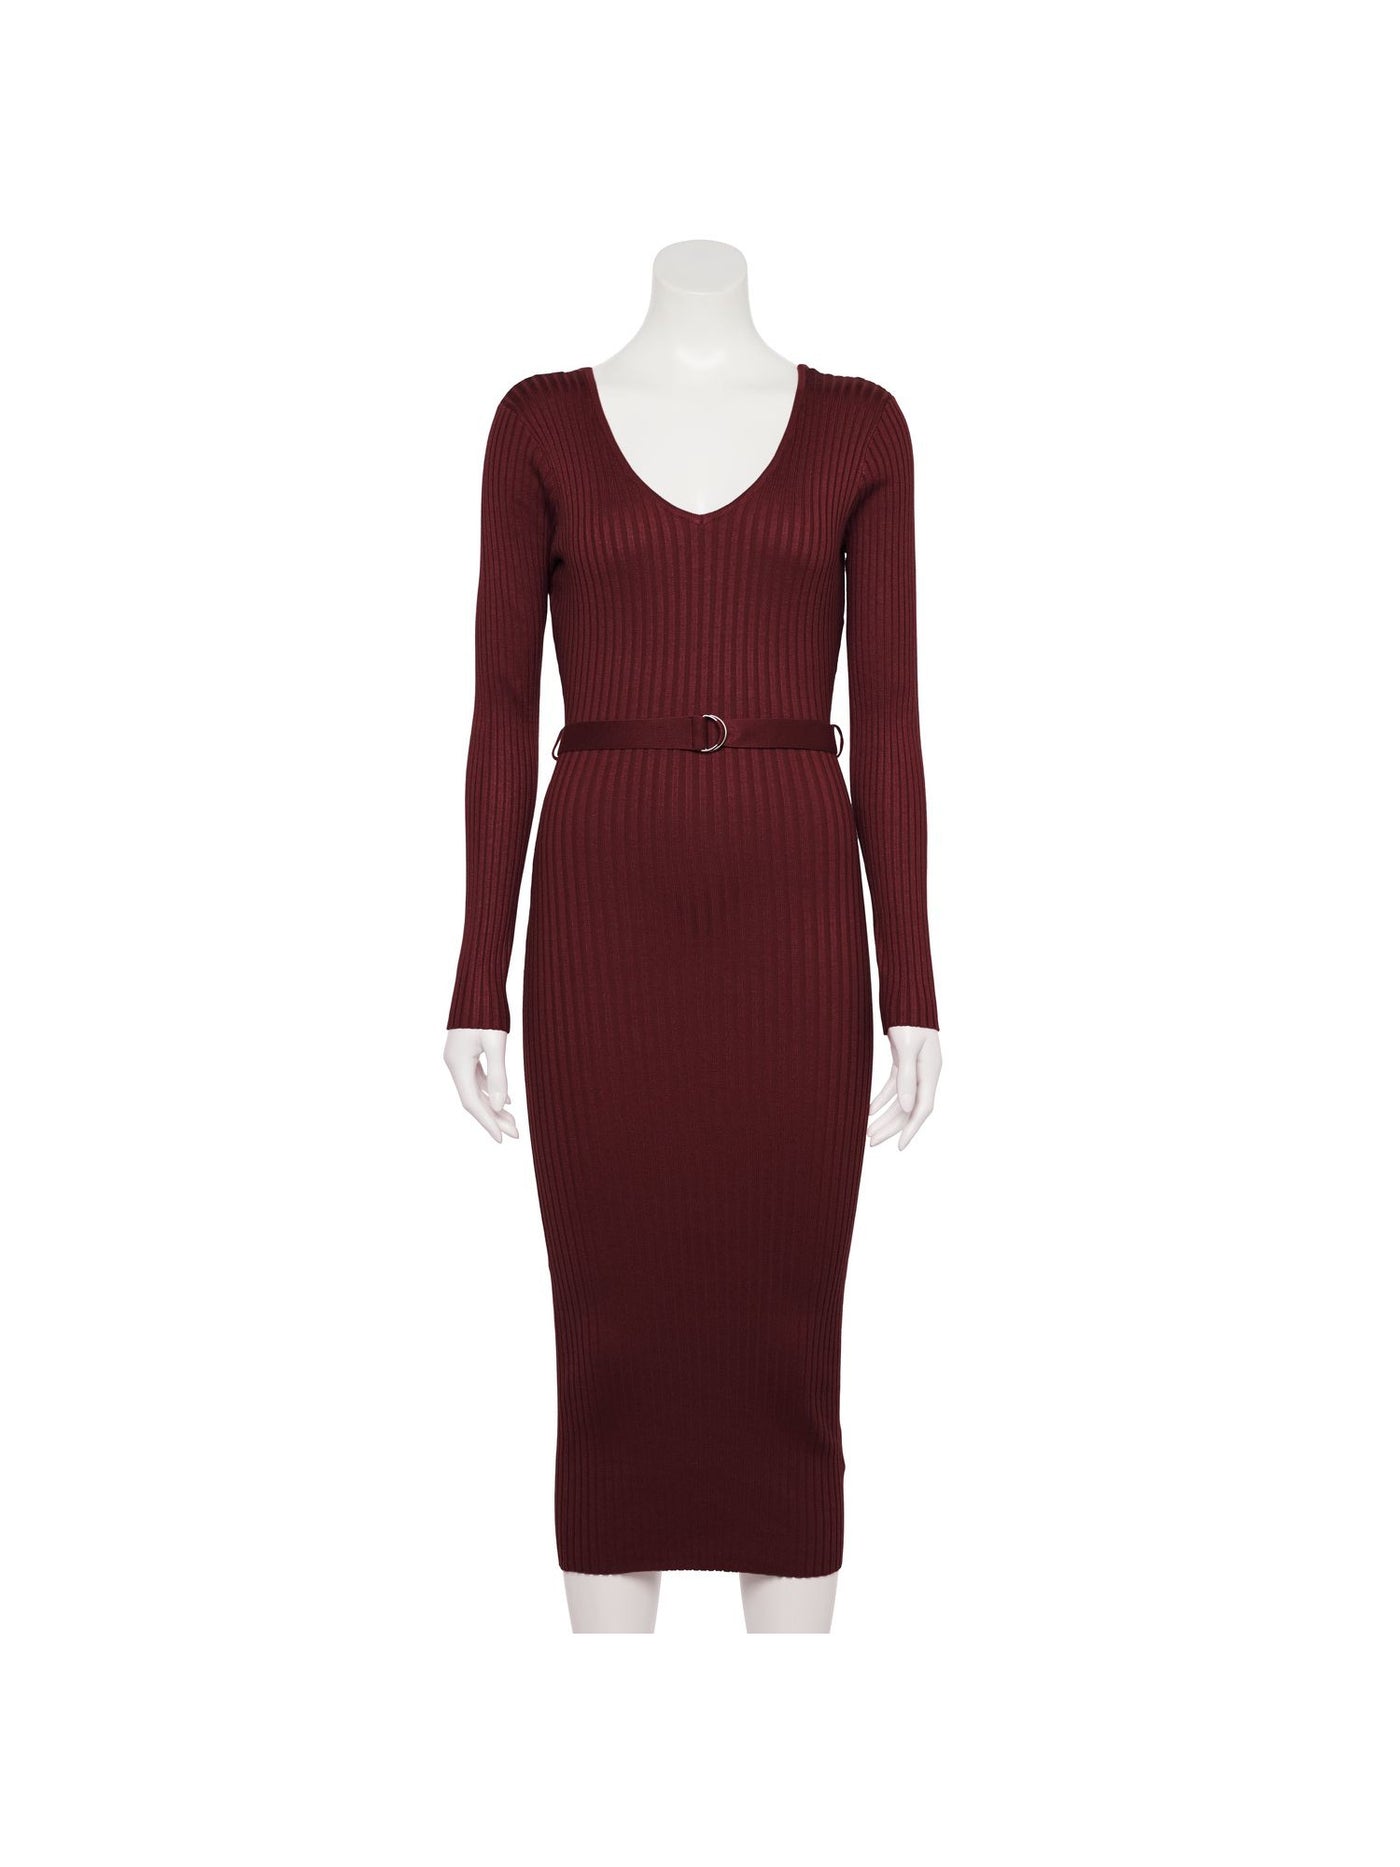 ALMOST FAMOUS Womens Burgundy Ribbed Belted V-back Long Sleeve V Neck Midi Party Body Con Dress Juniors M